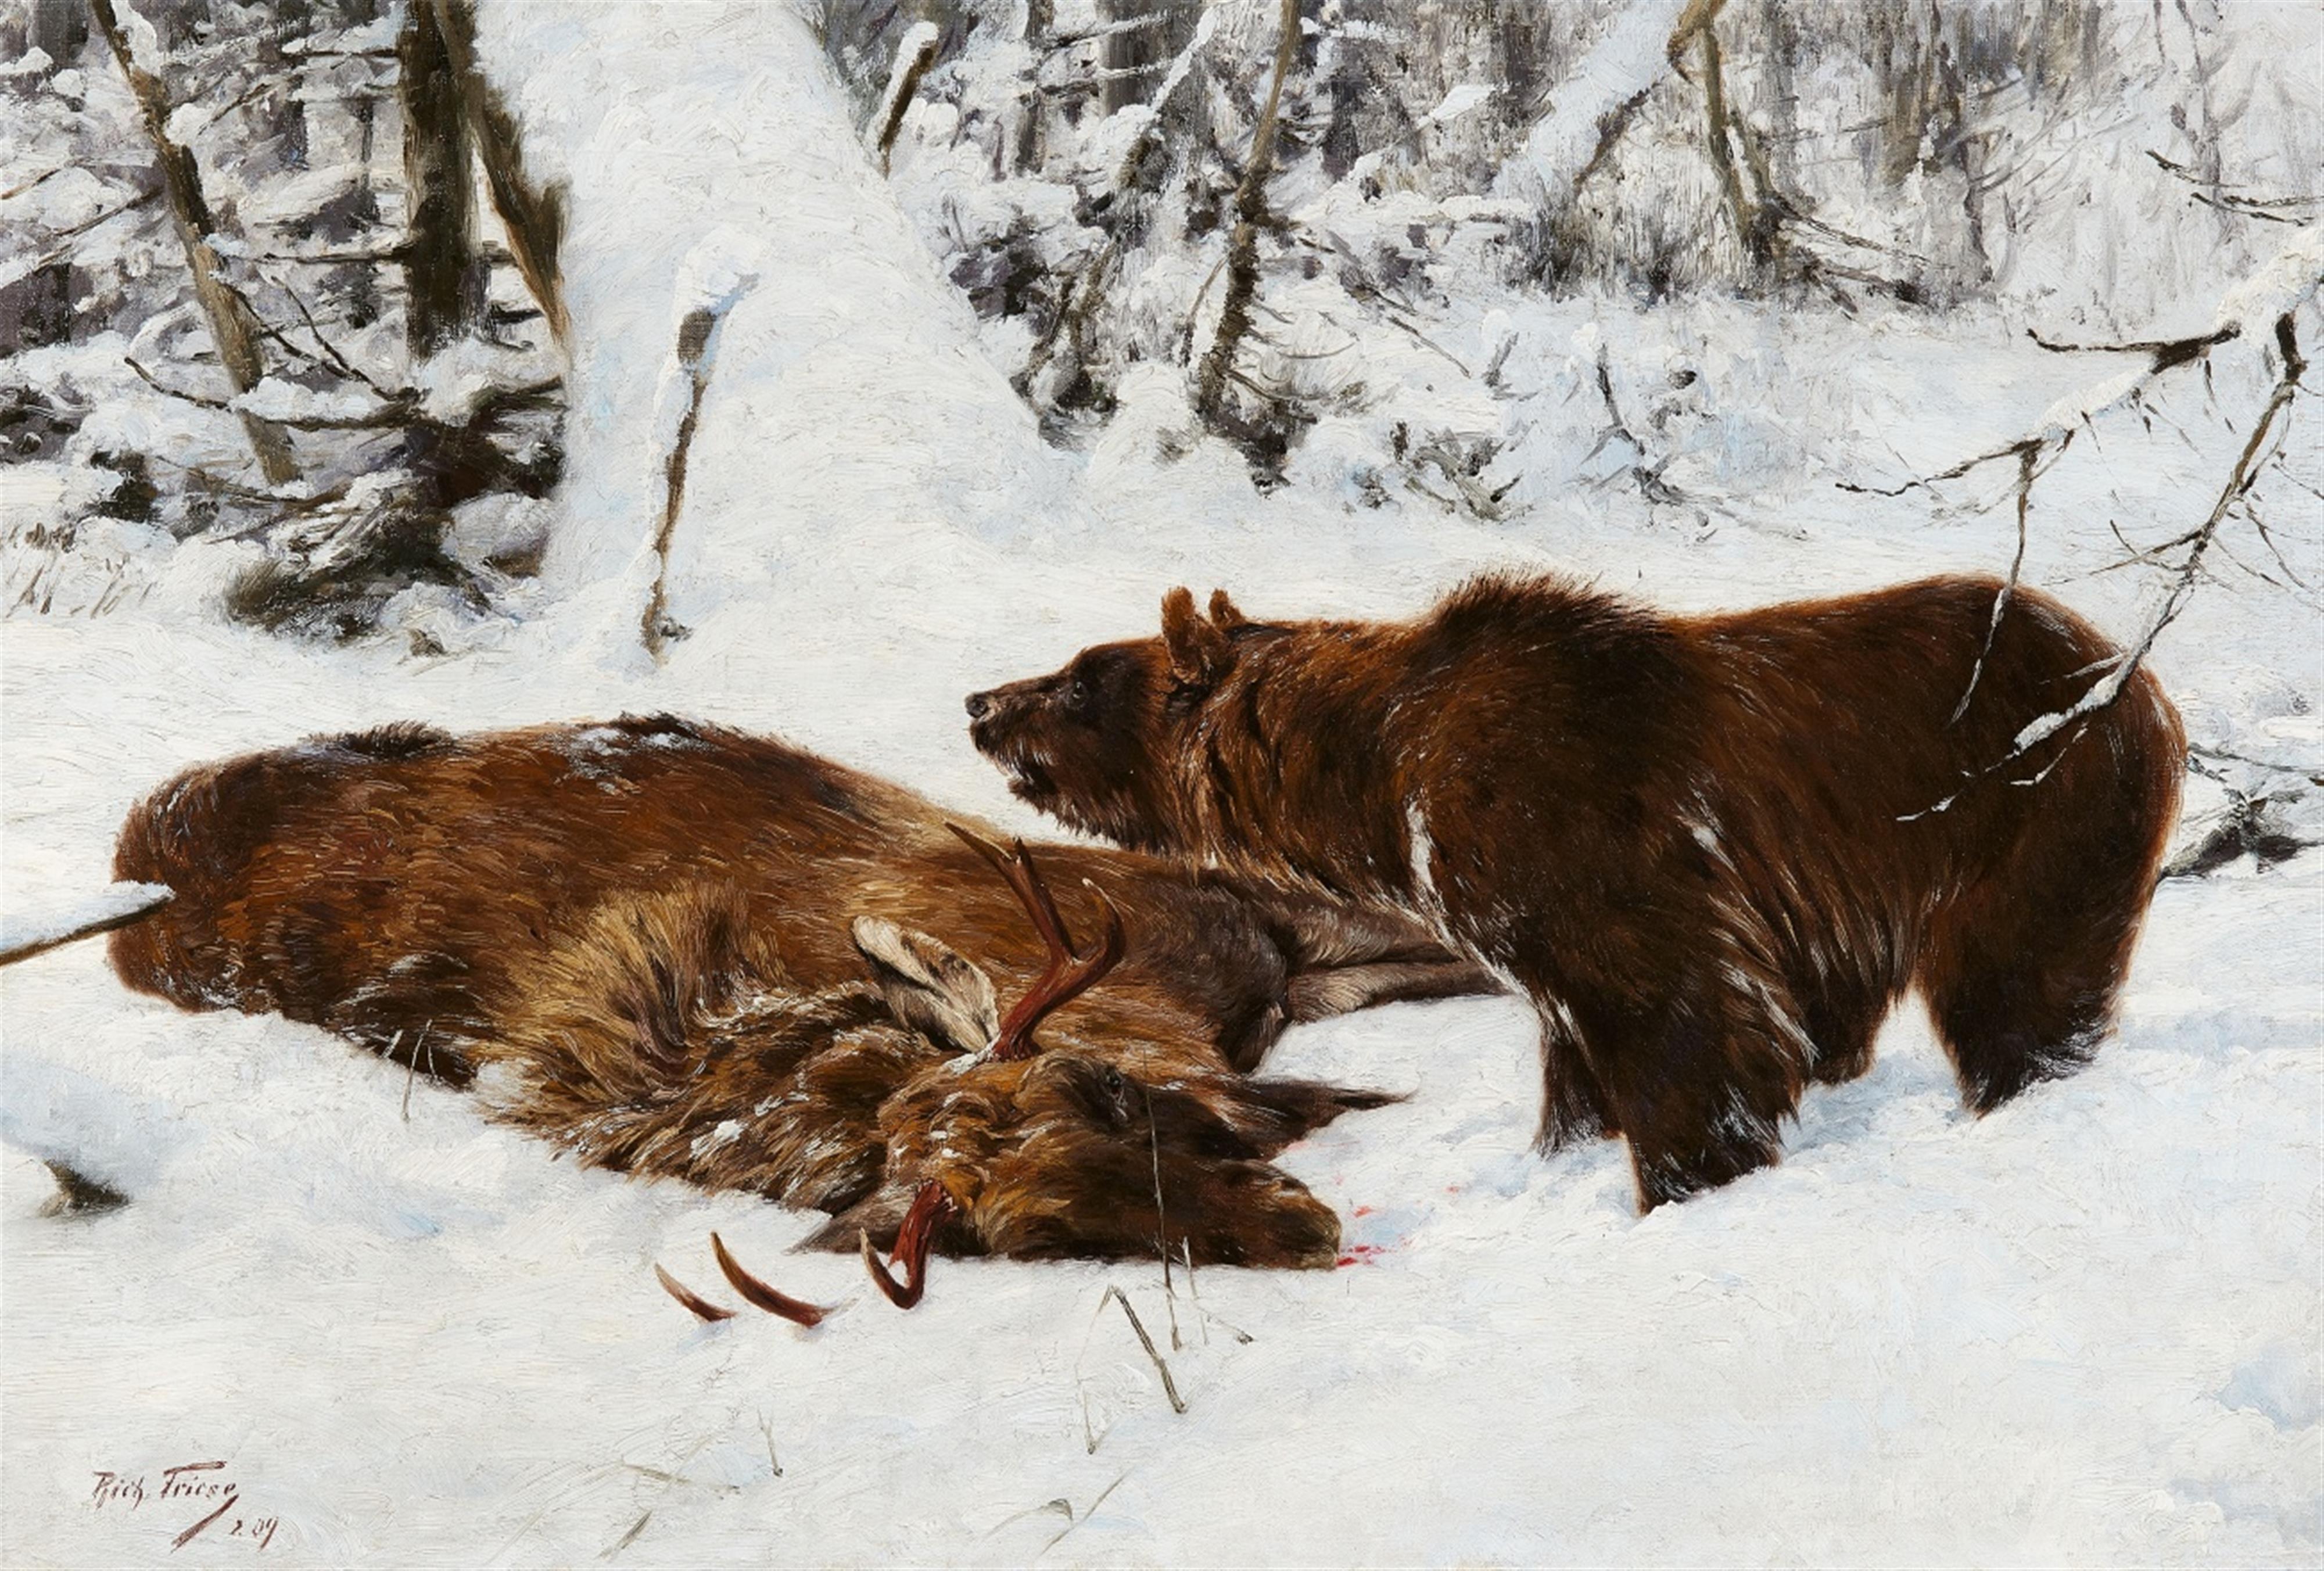 Richard Friese - Norwegian Winter Landscape with an Elk and a Brown Bear - image-1